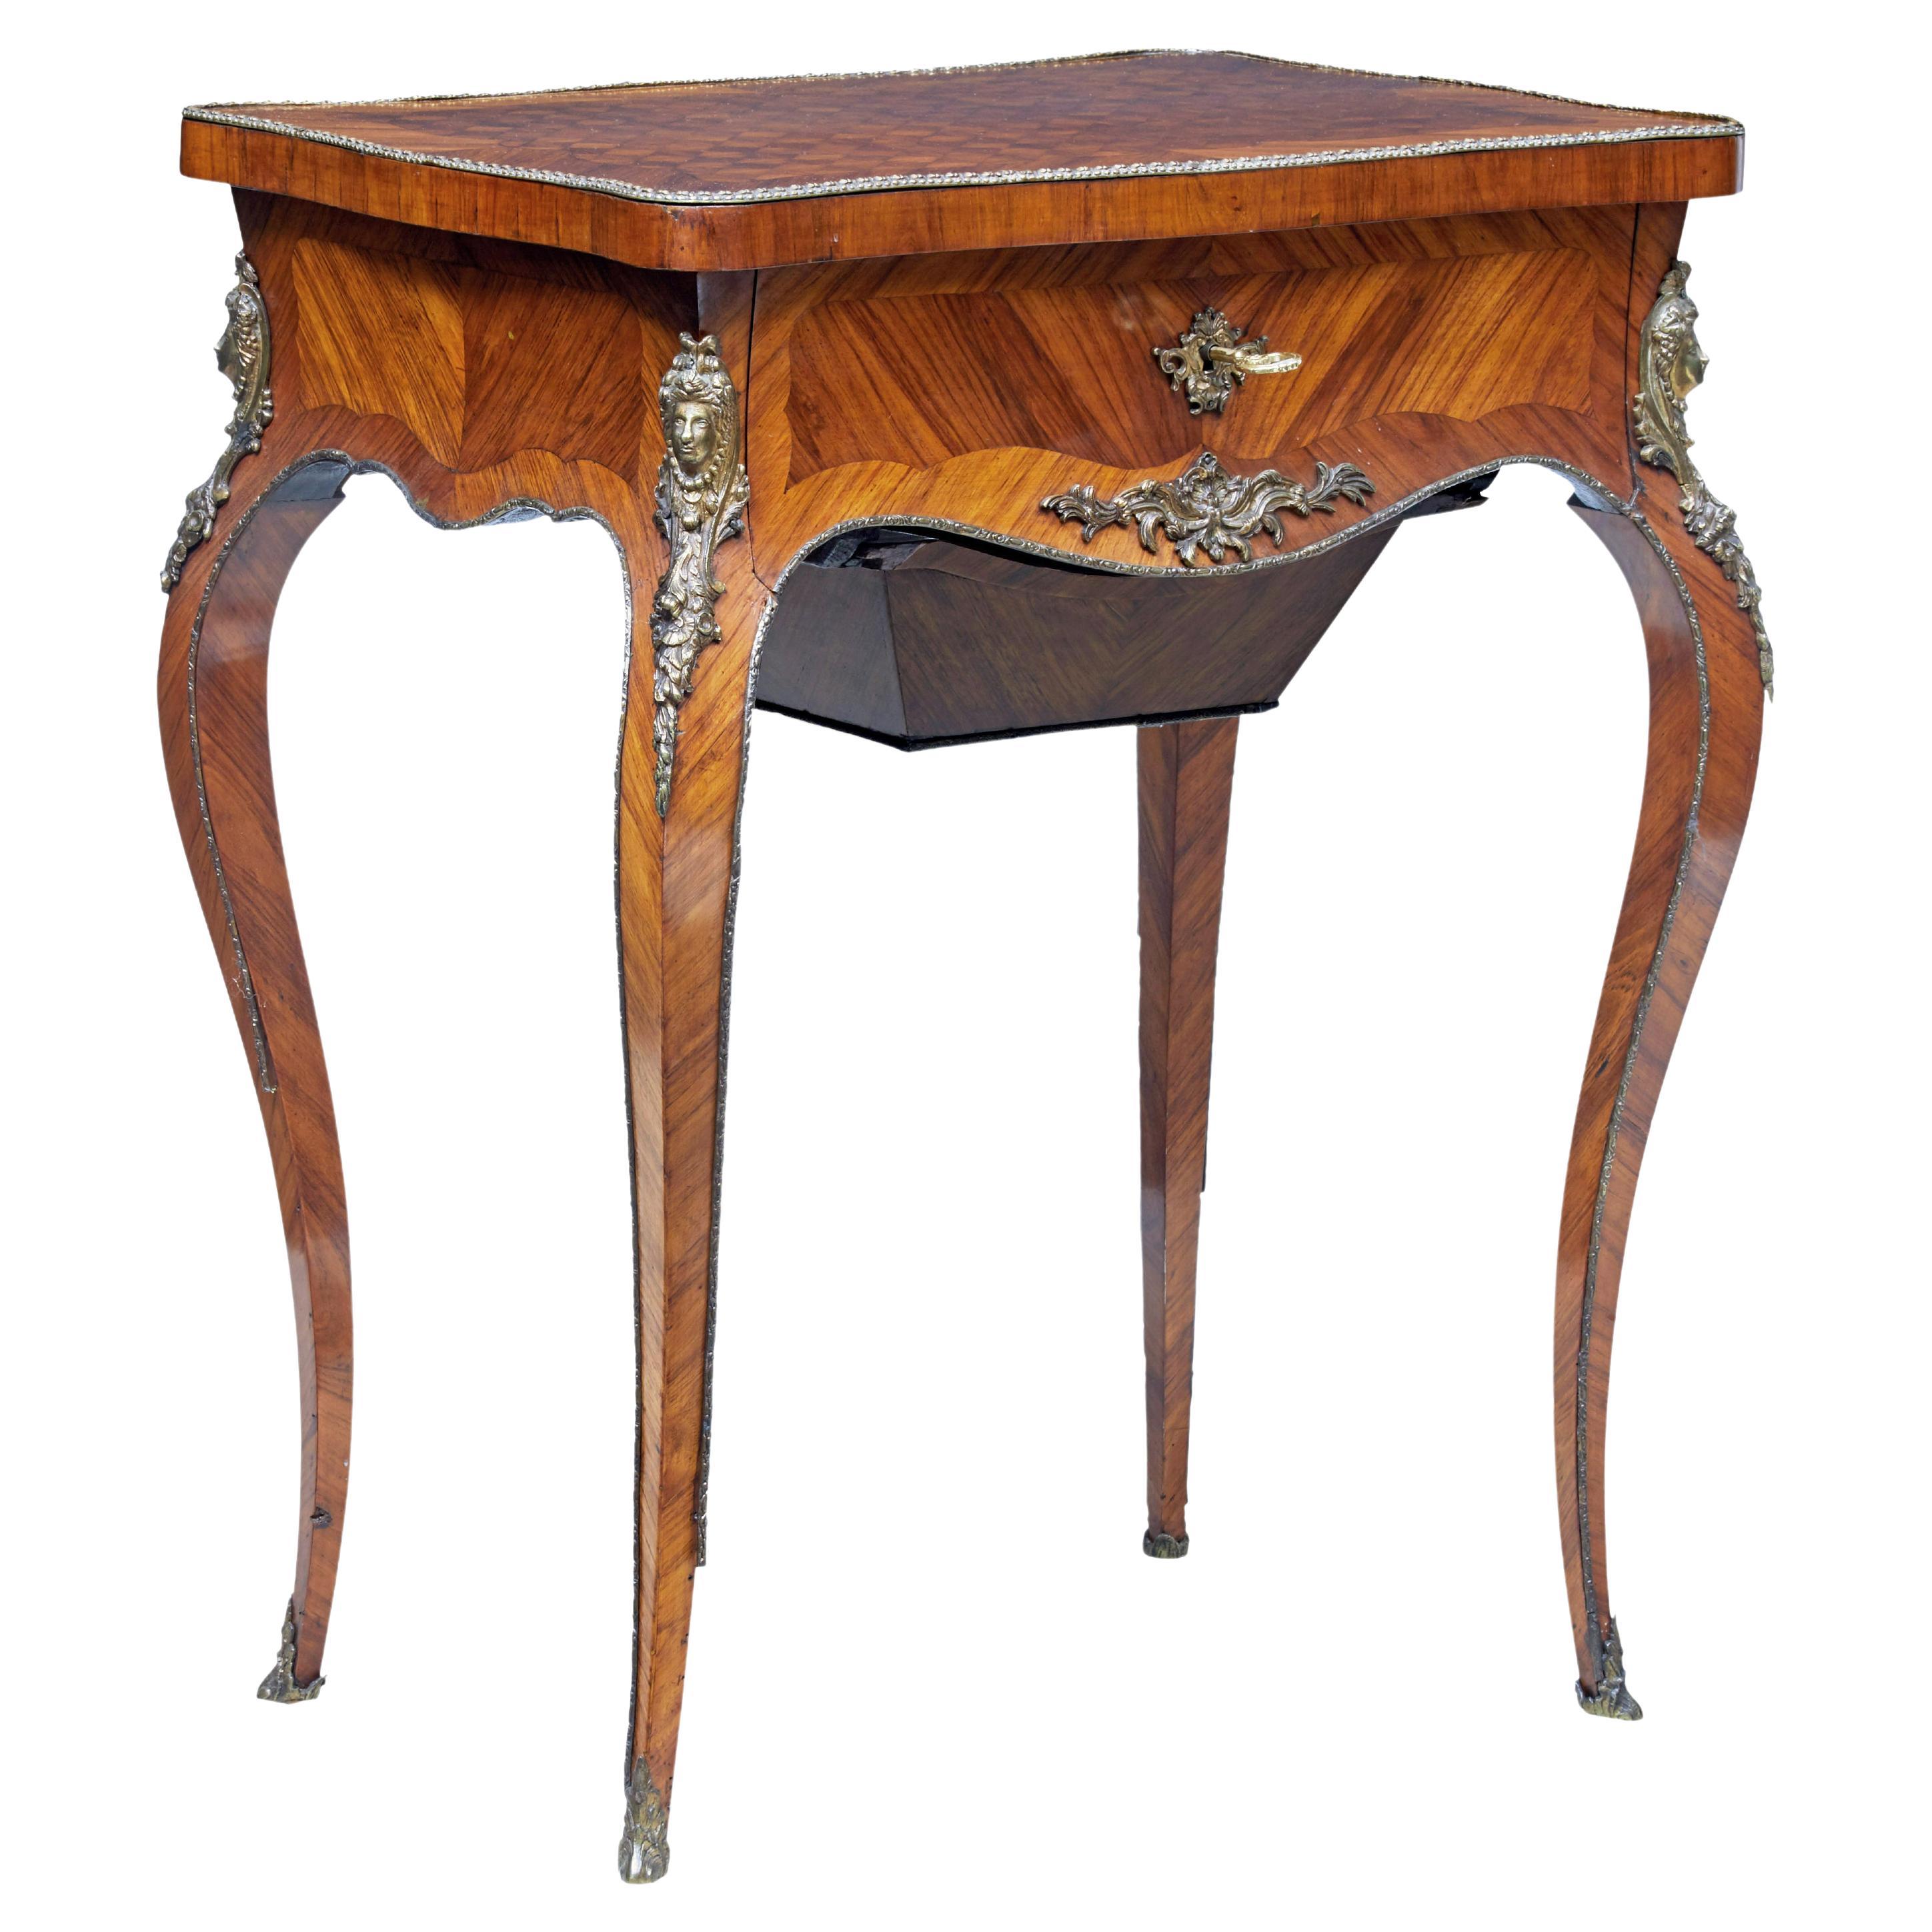 19th century French kingwood sewing work table For Sale